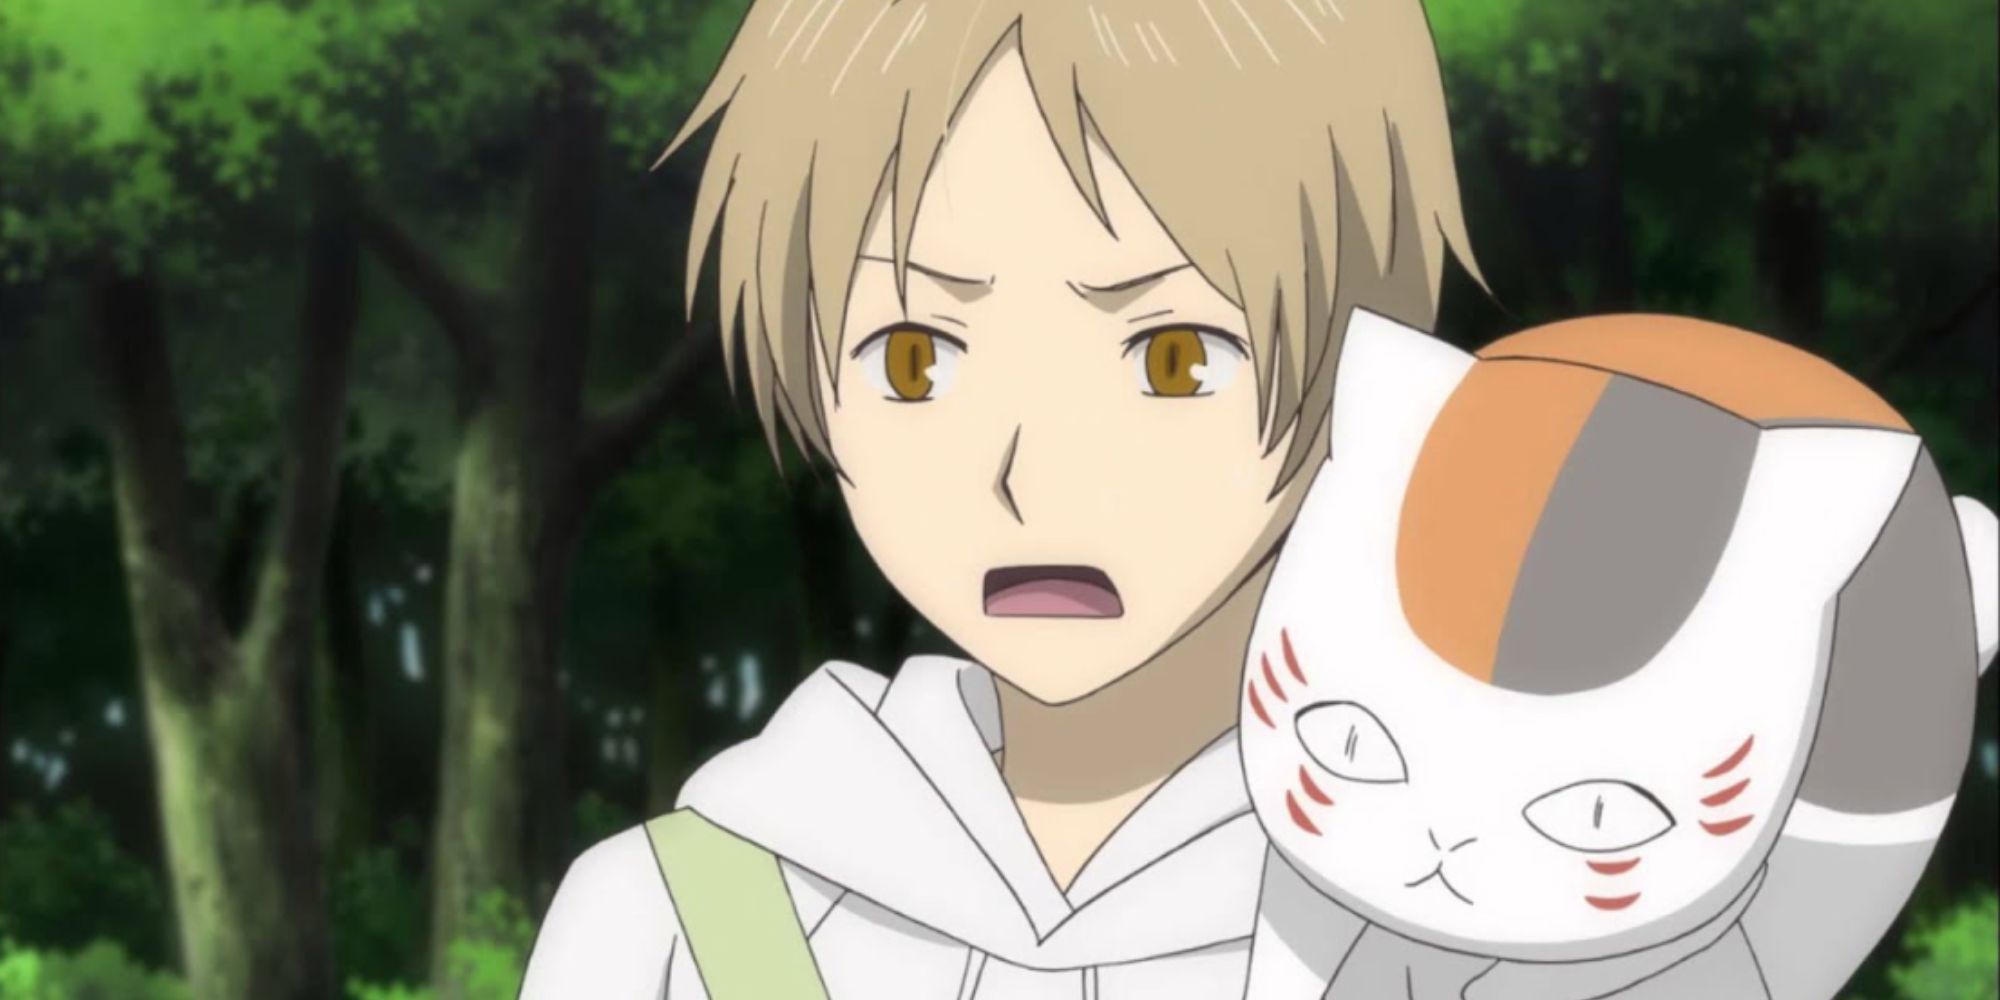 natsume with a cat spirit